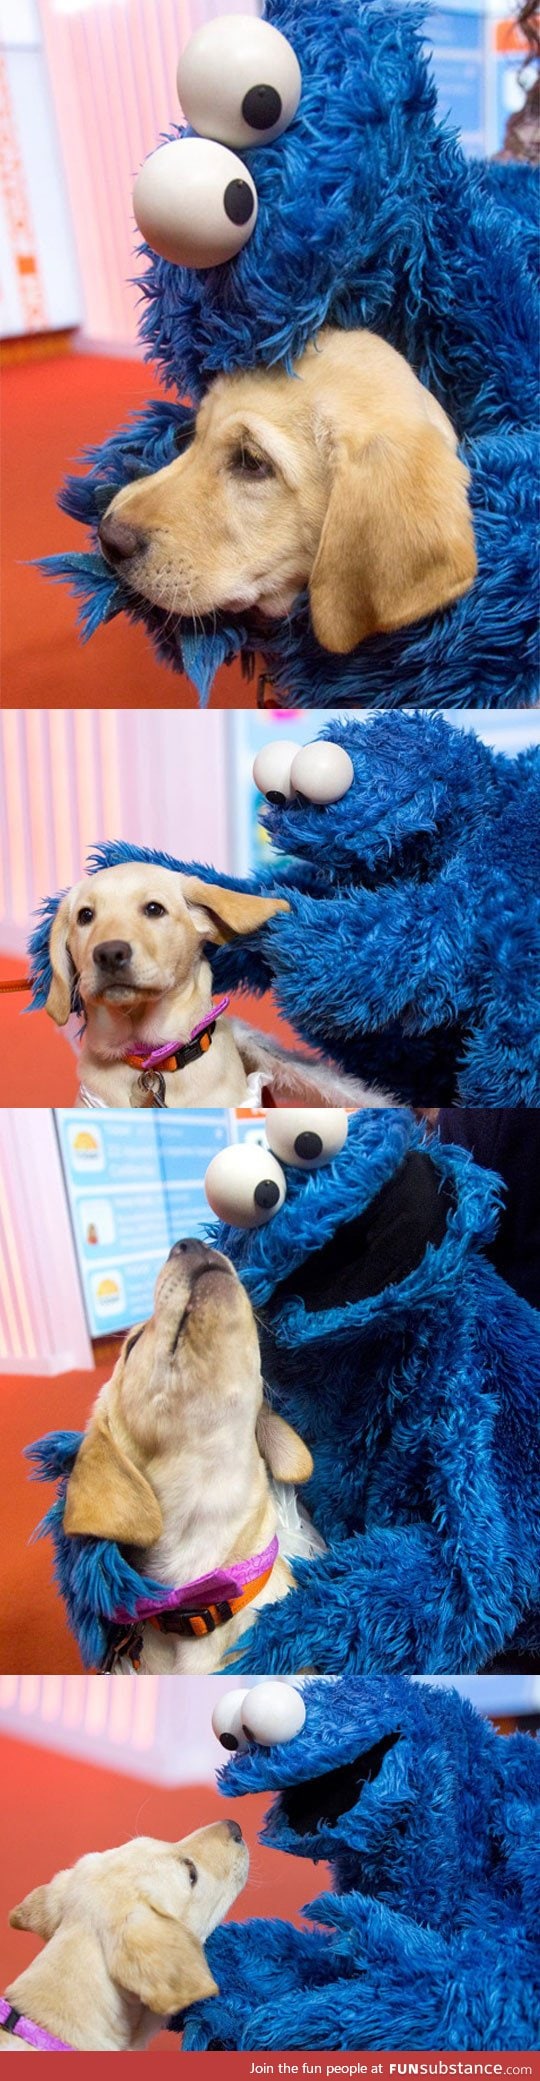 Dog meets cookie monster